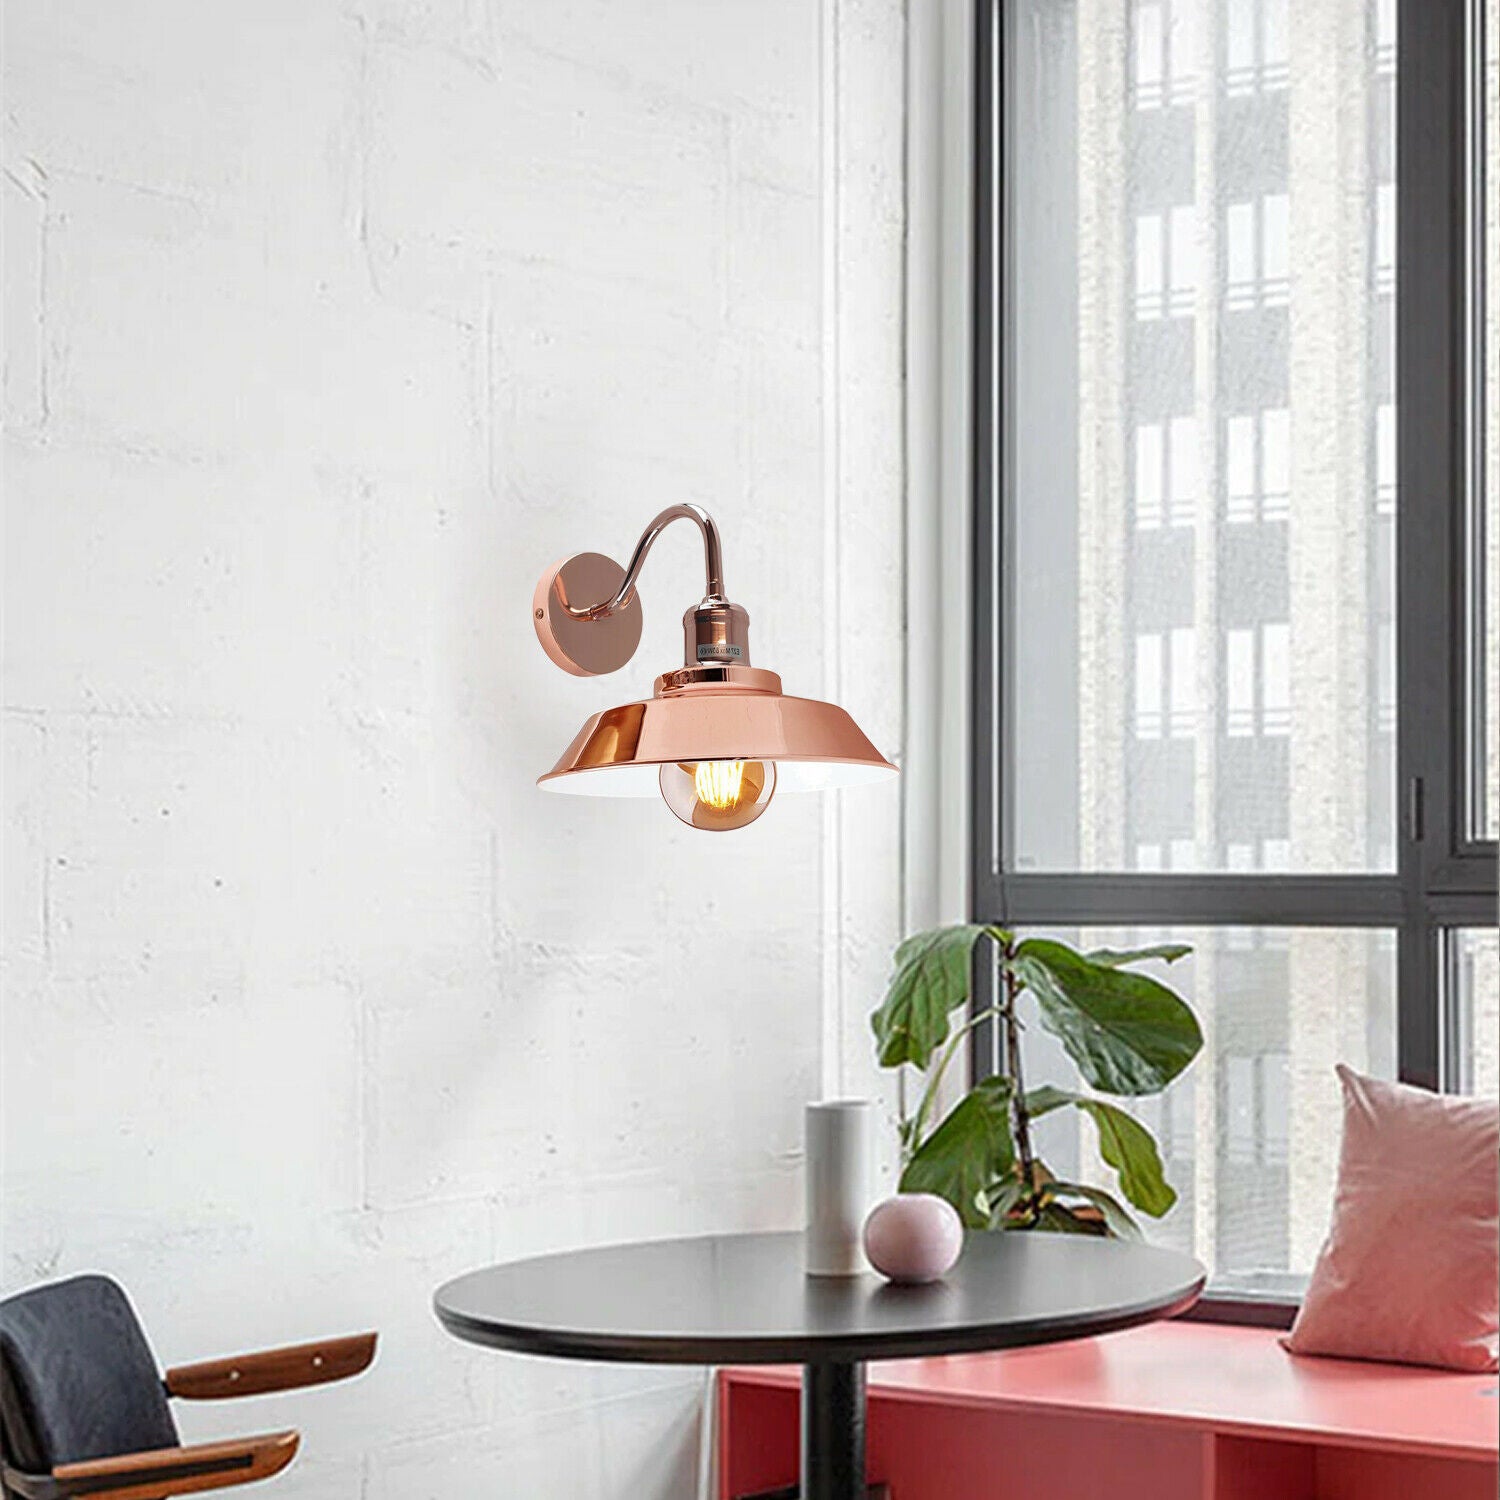 https://ledsone.co.uk/de/products/rose-gold-wall-mounted-light-wall-sconces-lamp-fixture-light